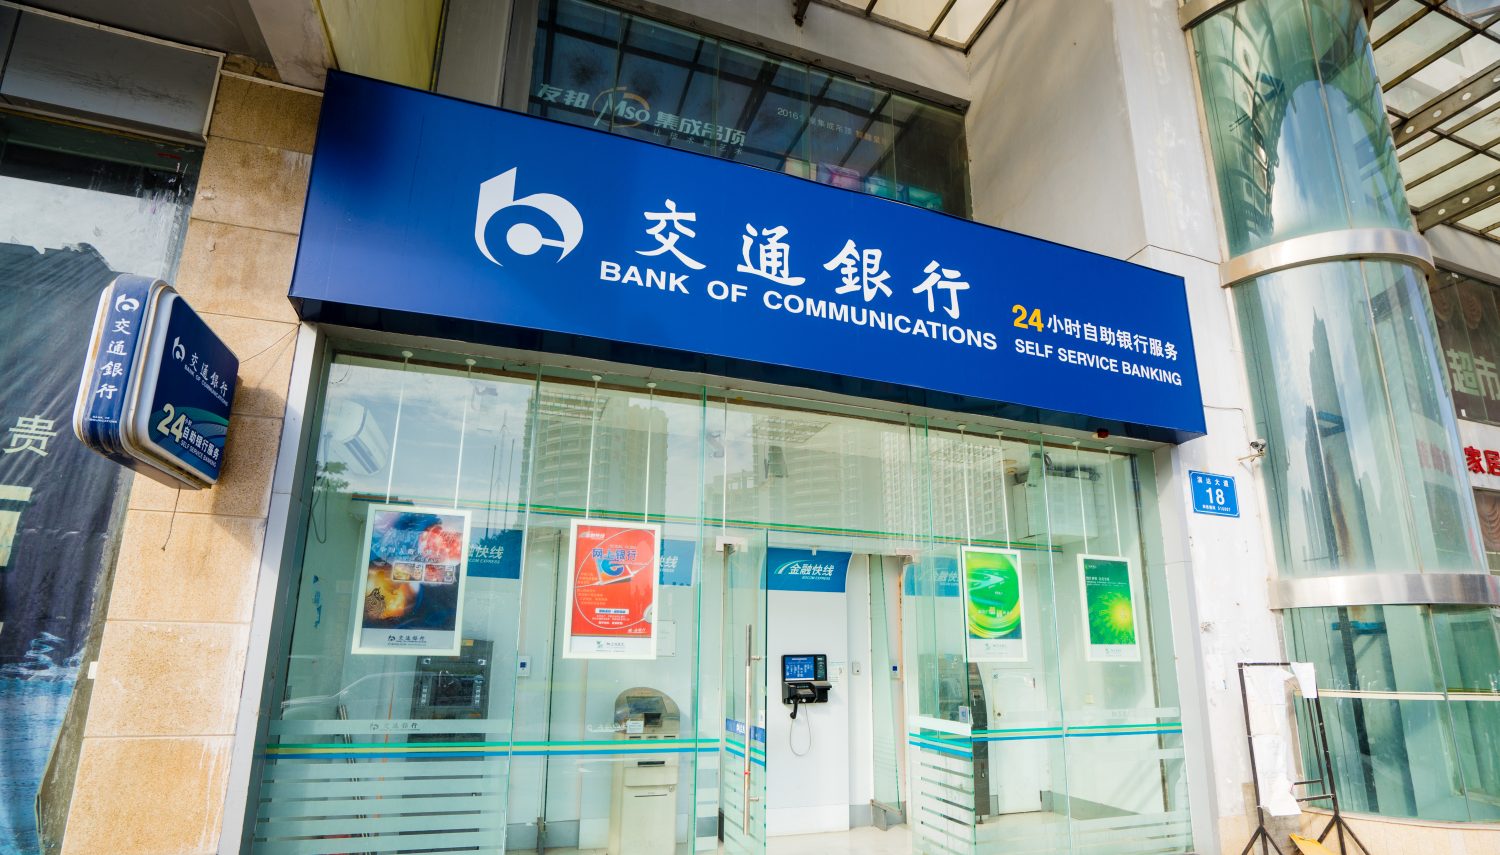 Chinese Banking Giant Issues $1.3 Billion In Securities On A Blockchain